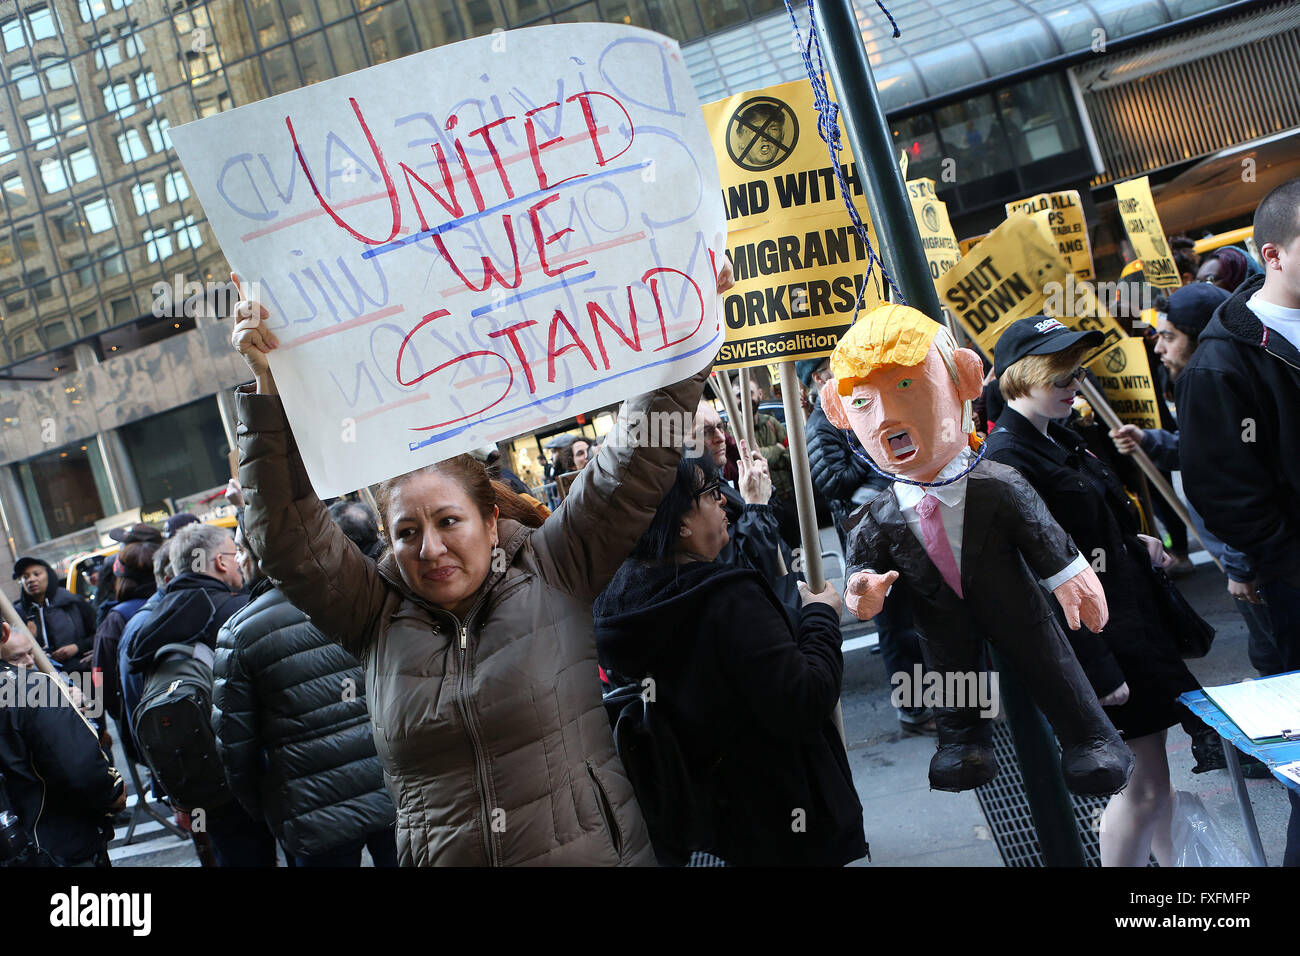 New York City, NY, USA. 14th Apr, 2016. A woman poses with a Donald Trump pi''“ata hanging from a noose. Hundreds of demonstrators protested Republican presidential candidate Donald Trump near Grand Hyatt New York on 42nd Street and Lexington Avenue. Donald Trump was set to speak at the hotel for the NY State Republican Gala, a fundraiser hosting all three Republican candidates that costs $1,000 a plate. Groups including the Muslim Democratic Club of New York, United We Dream Action, and Make the Road helped organize the protests. Credit:  ZUMA Press, Inc./Alamy Live News Stock Photo